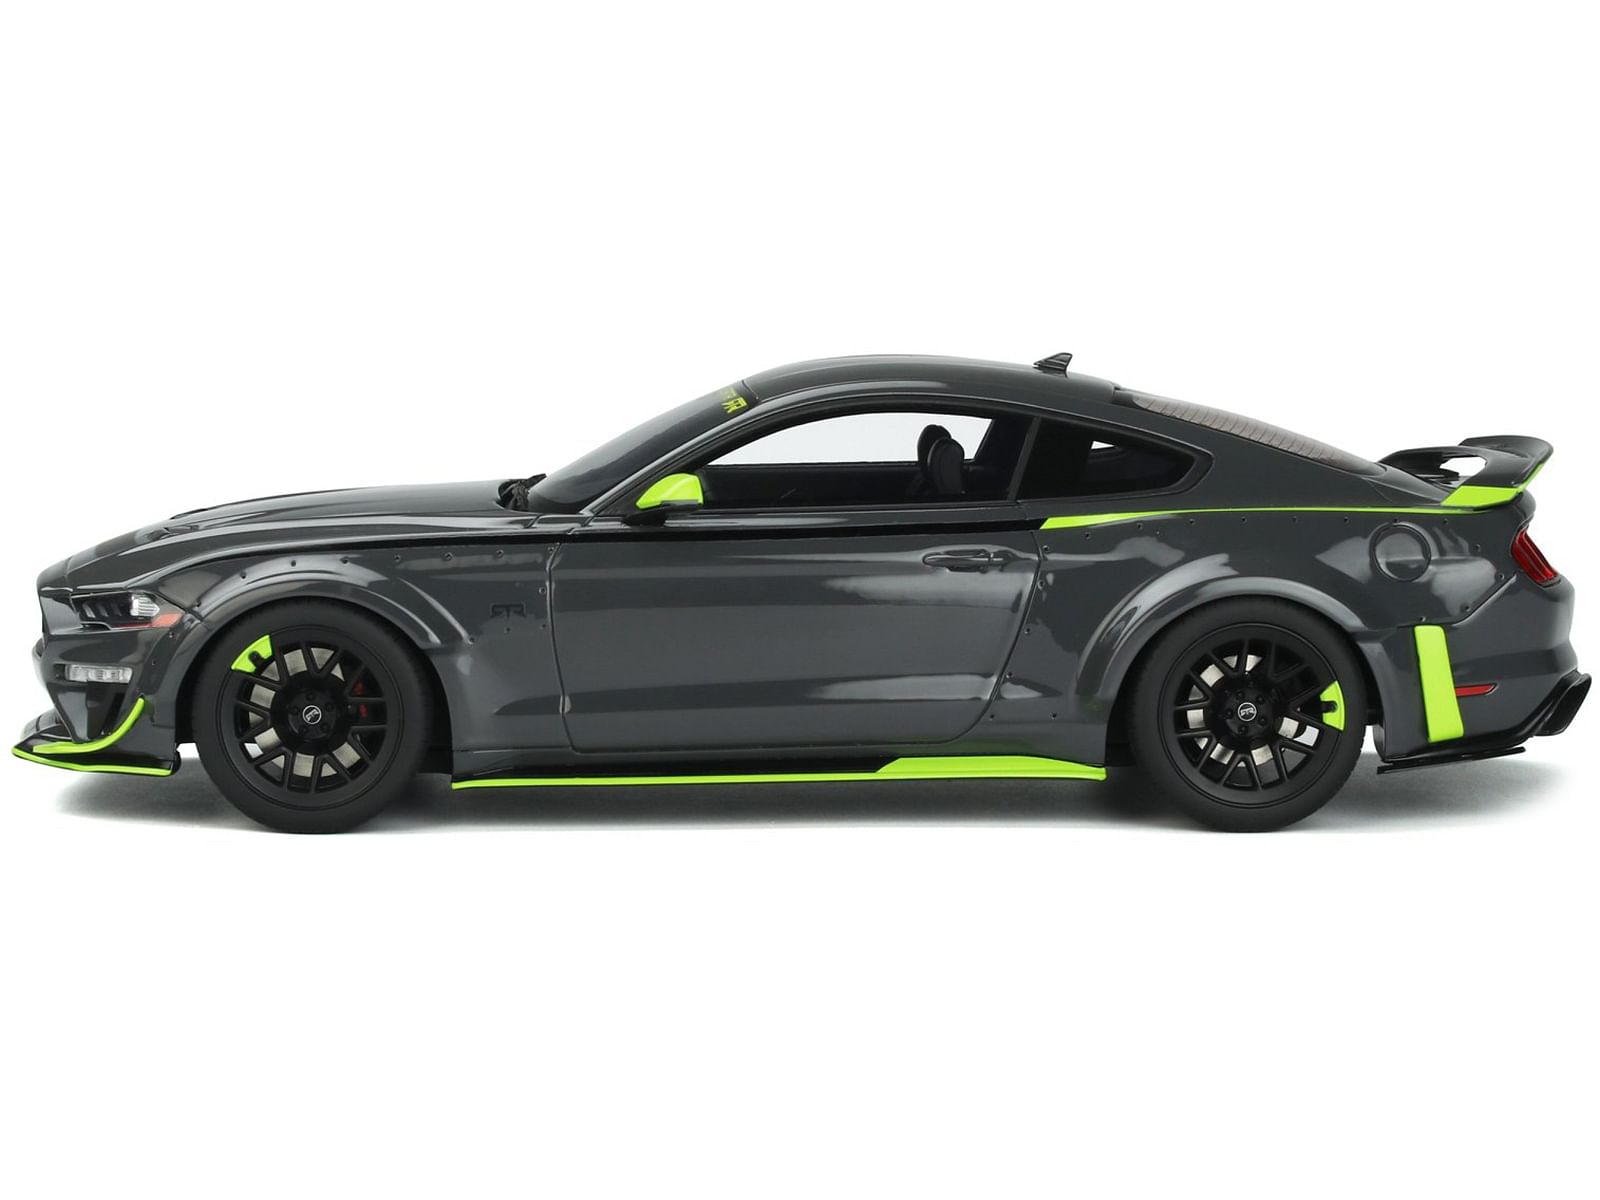 Ford Mustang RTR Spec 5 Gray with Black and Green Stripes “10th Anniversary” 1/18 Model Car by GT Spirit